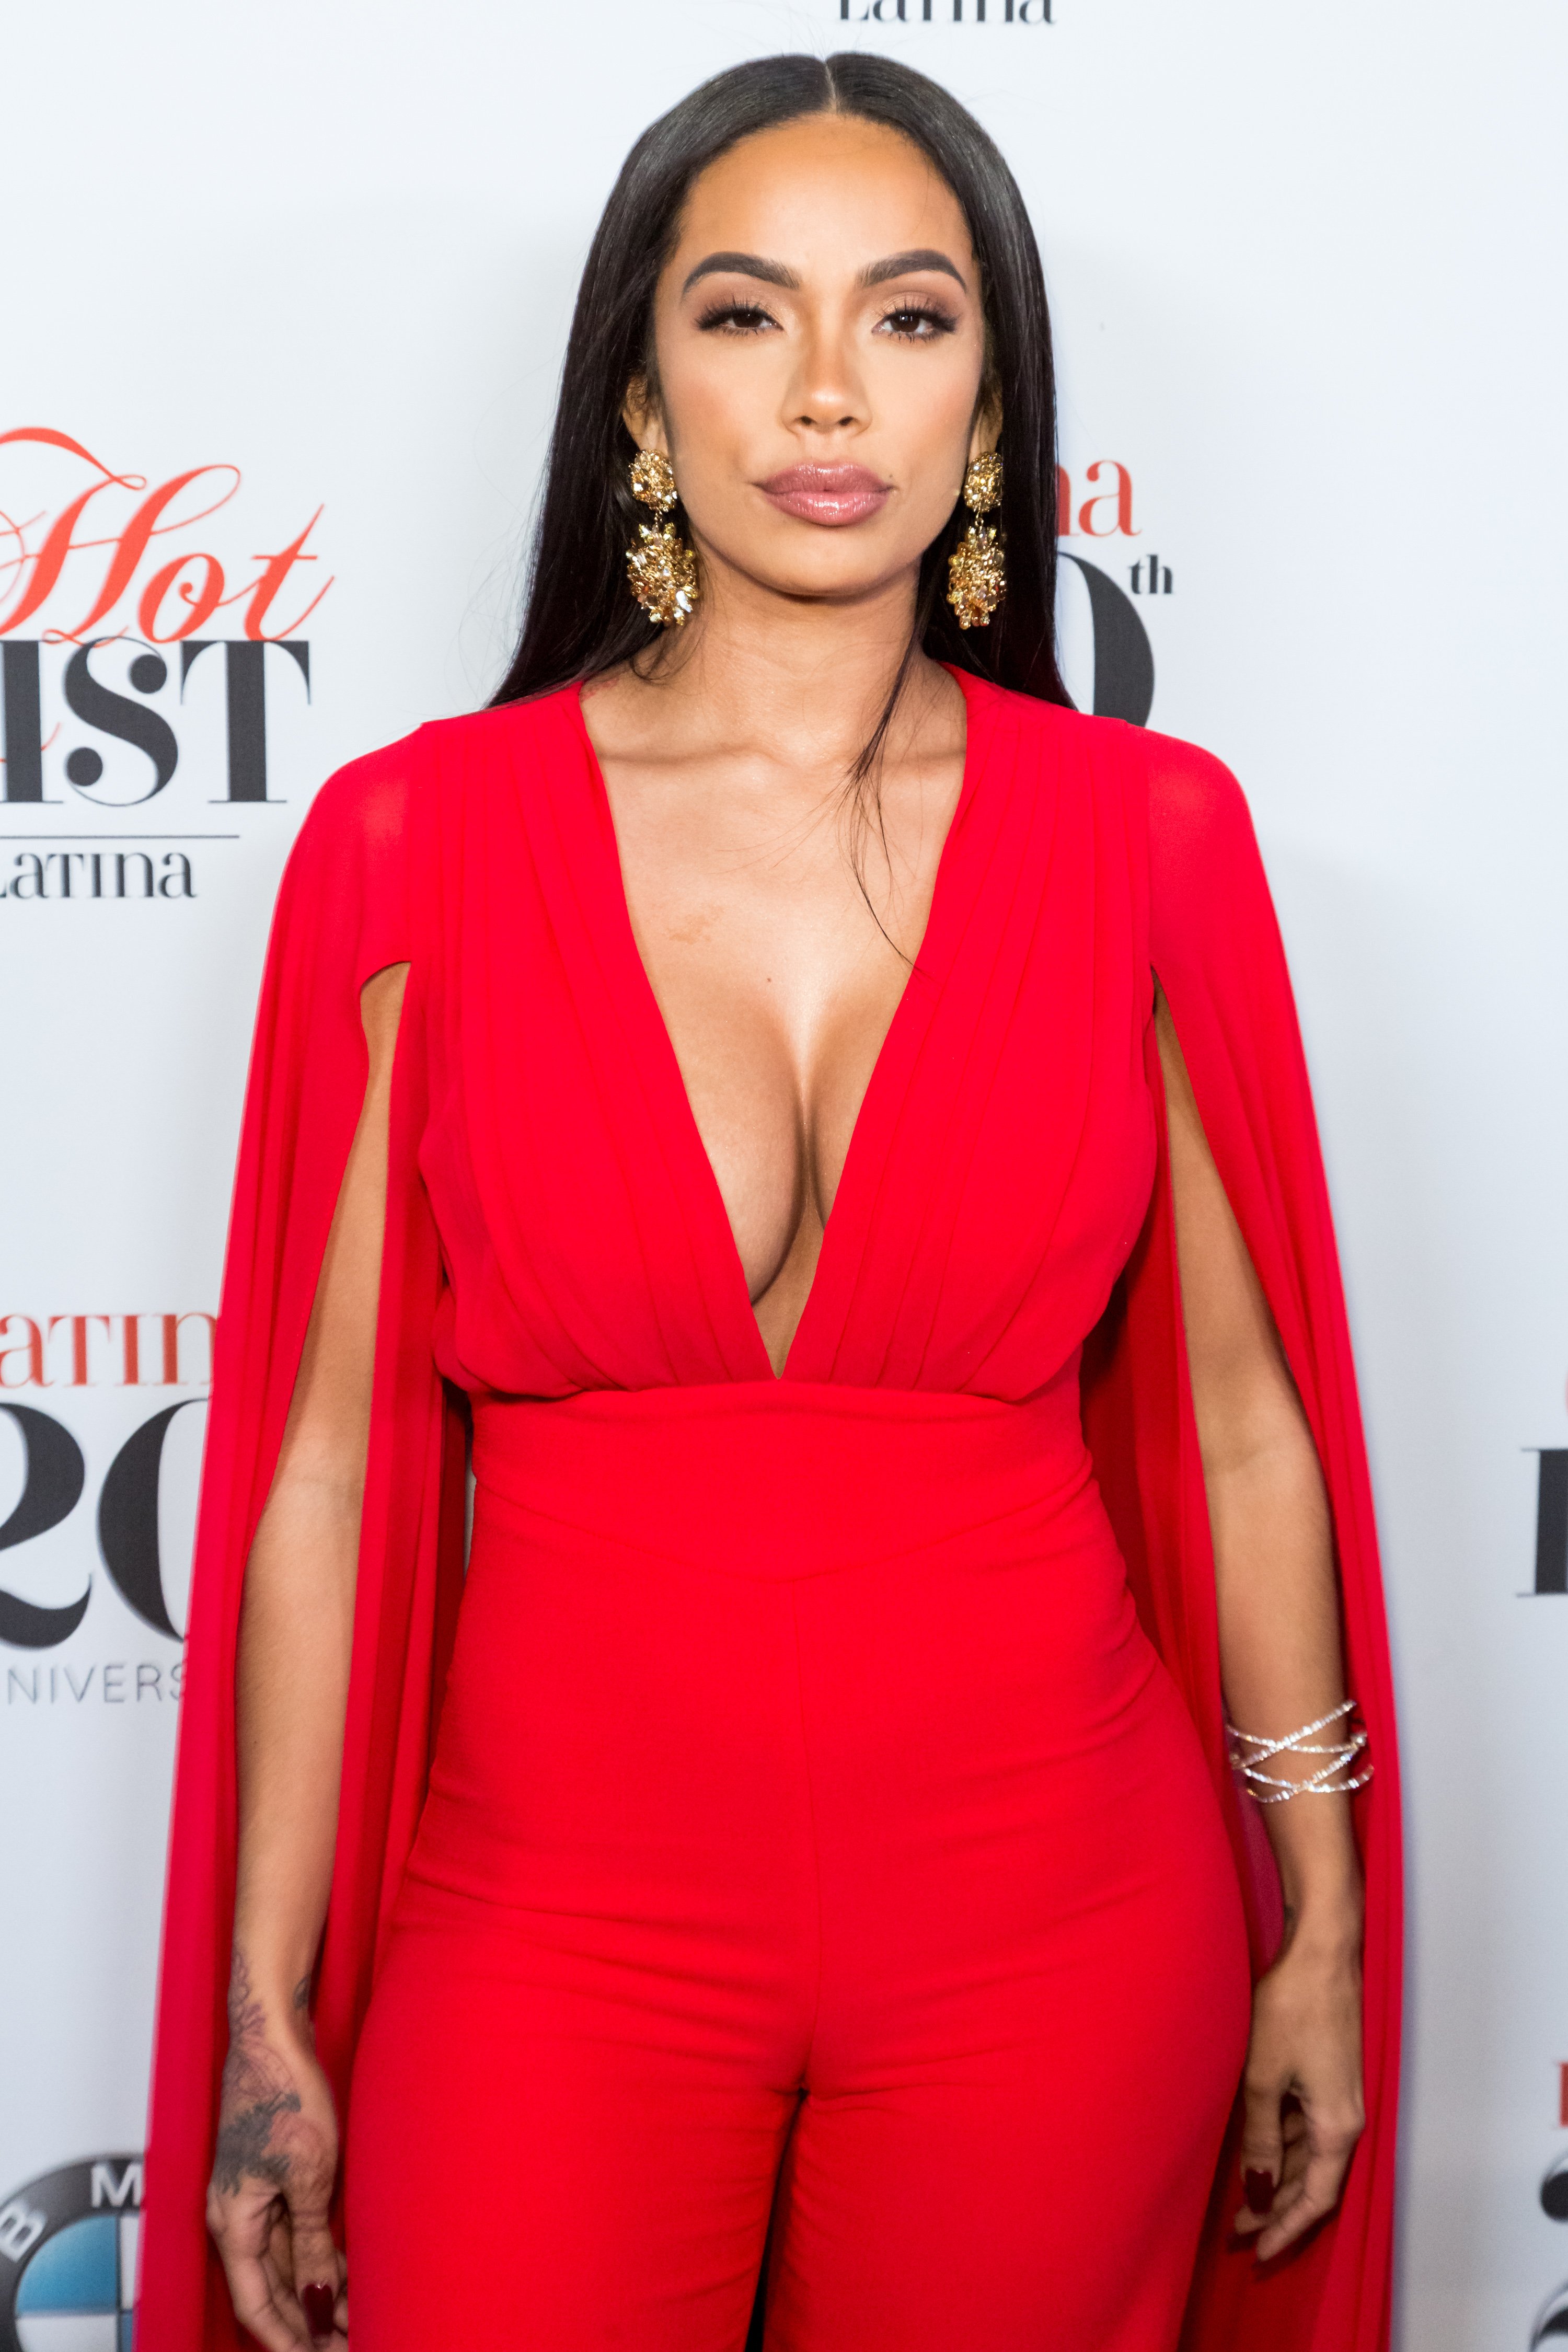 Erica Mena at the Latina Magazine's "Hollywood Hot List" Honorees Event at STK Los Angeles on November 2, 2016 in Los Angeles, California.| Source: Getty Images